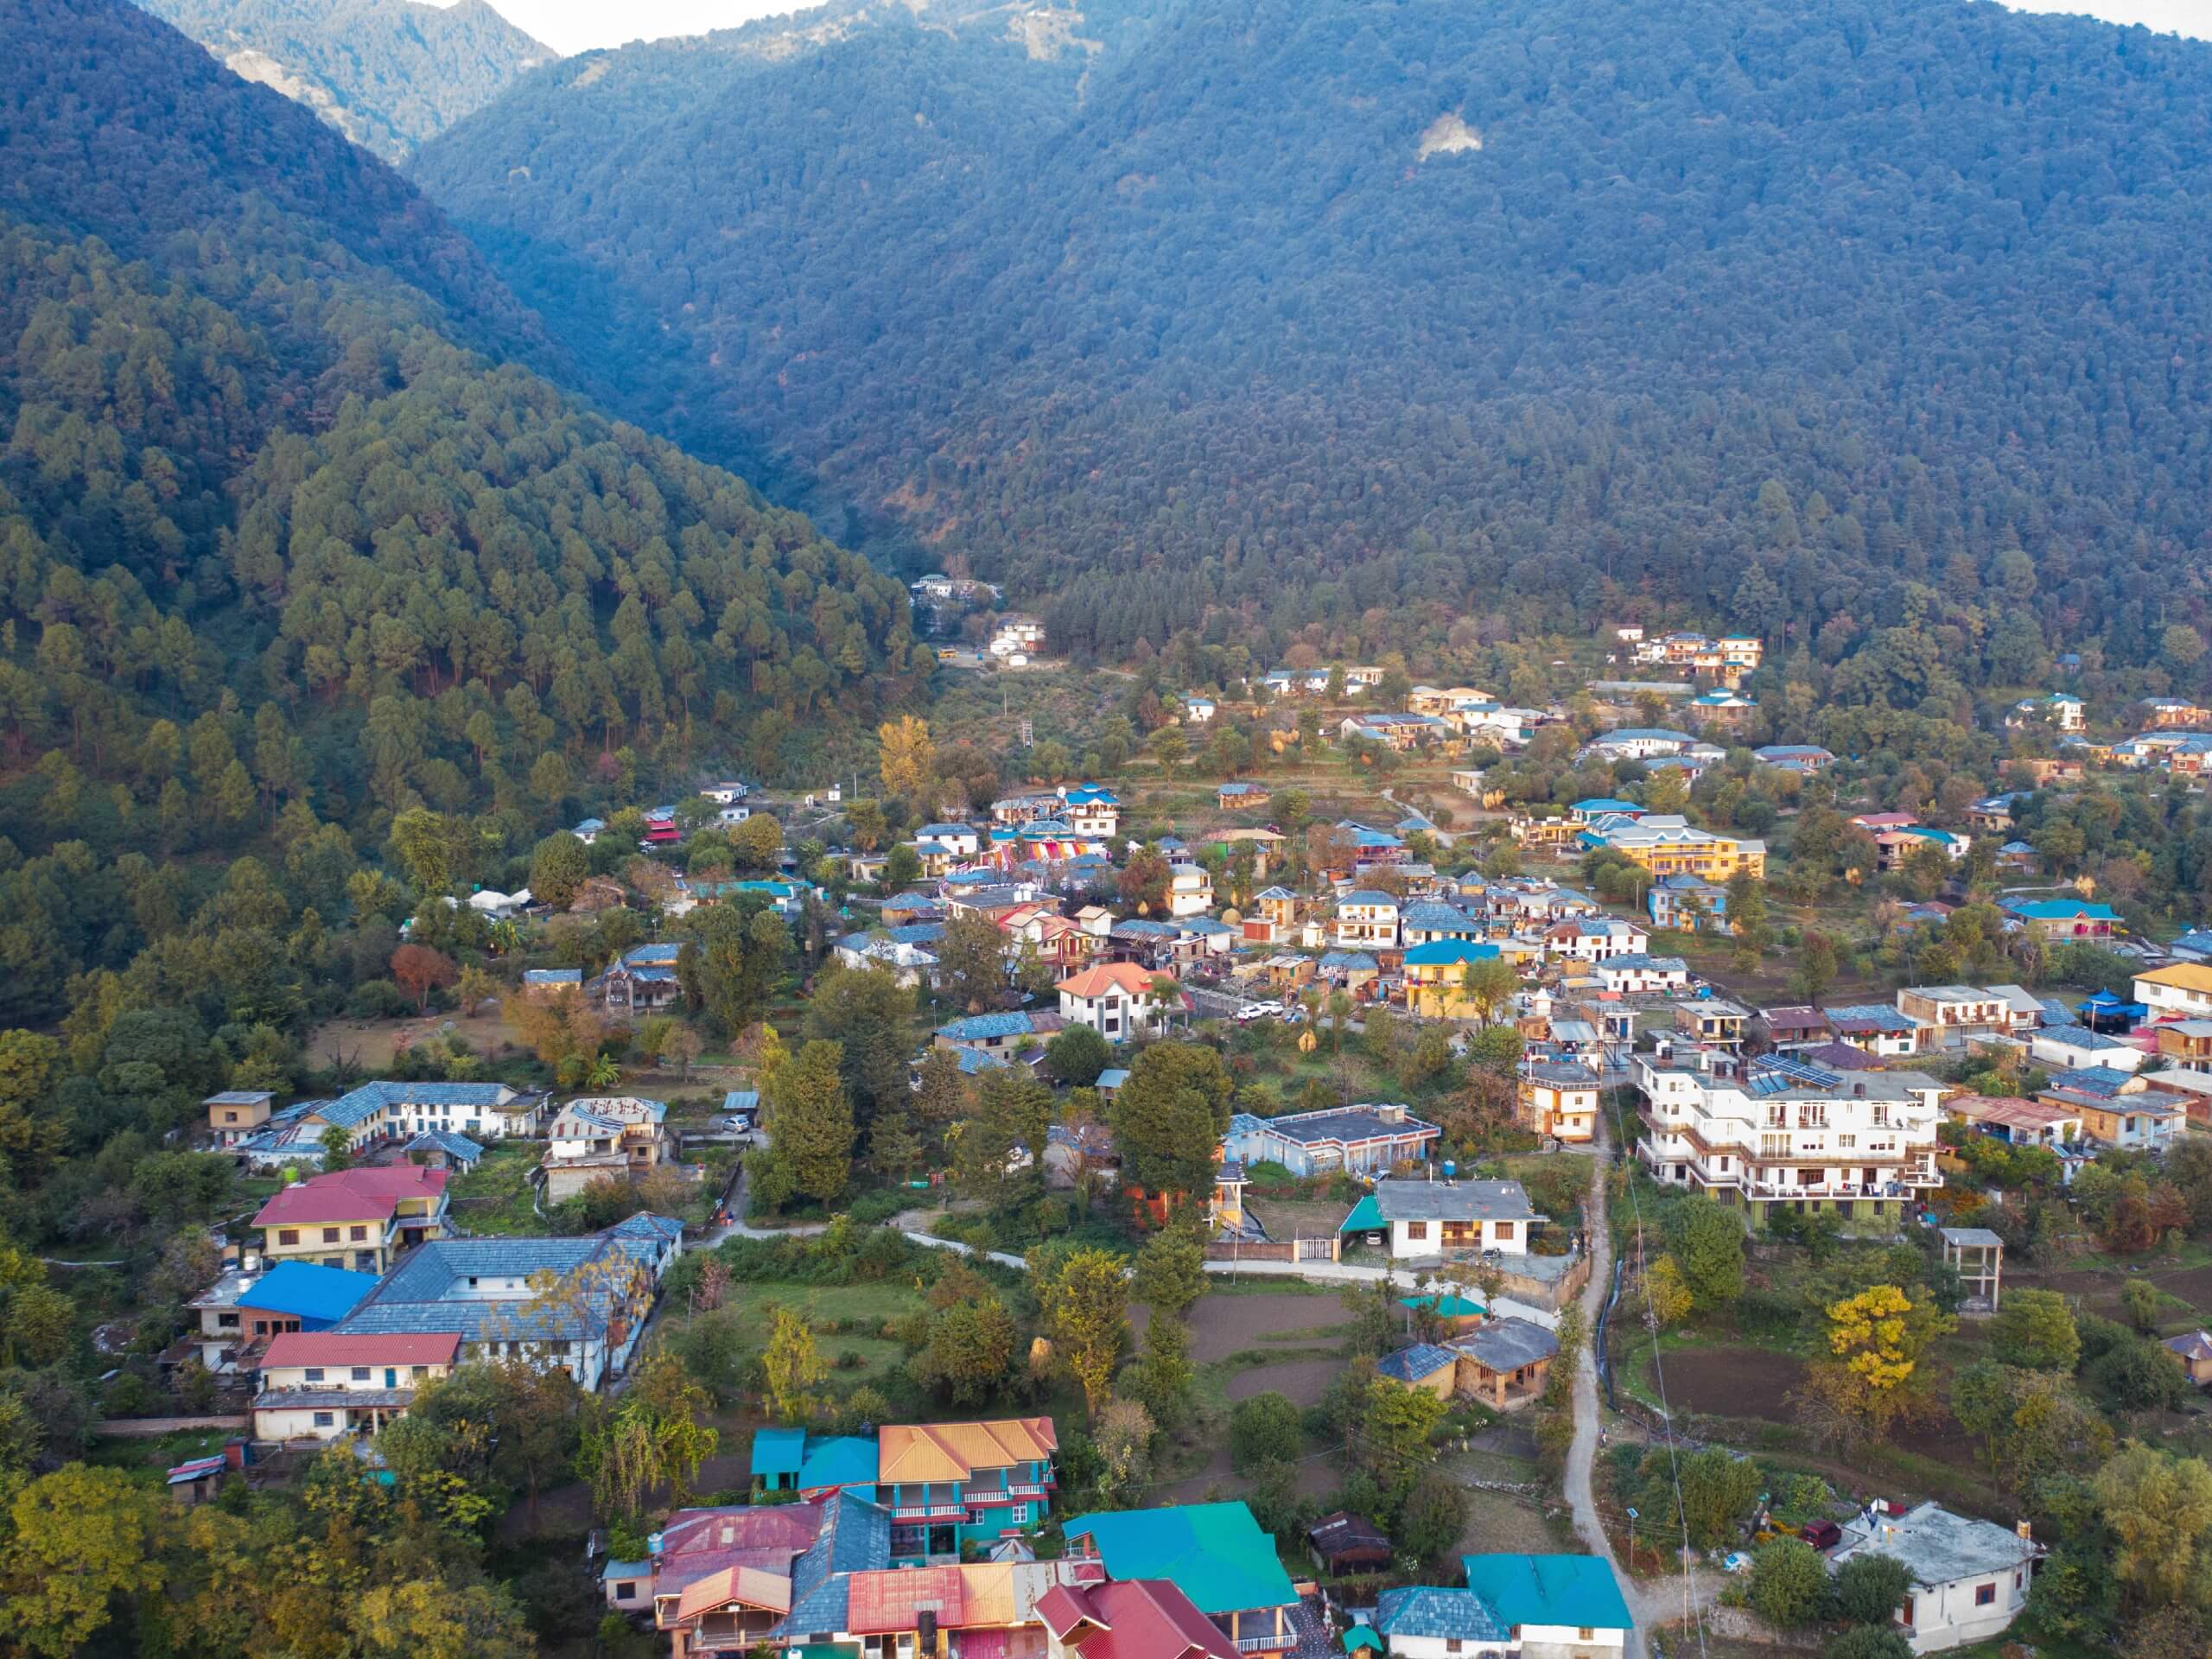 Manali as seen from the above